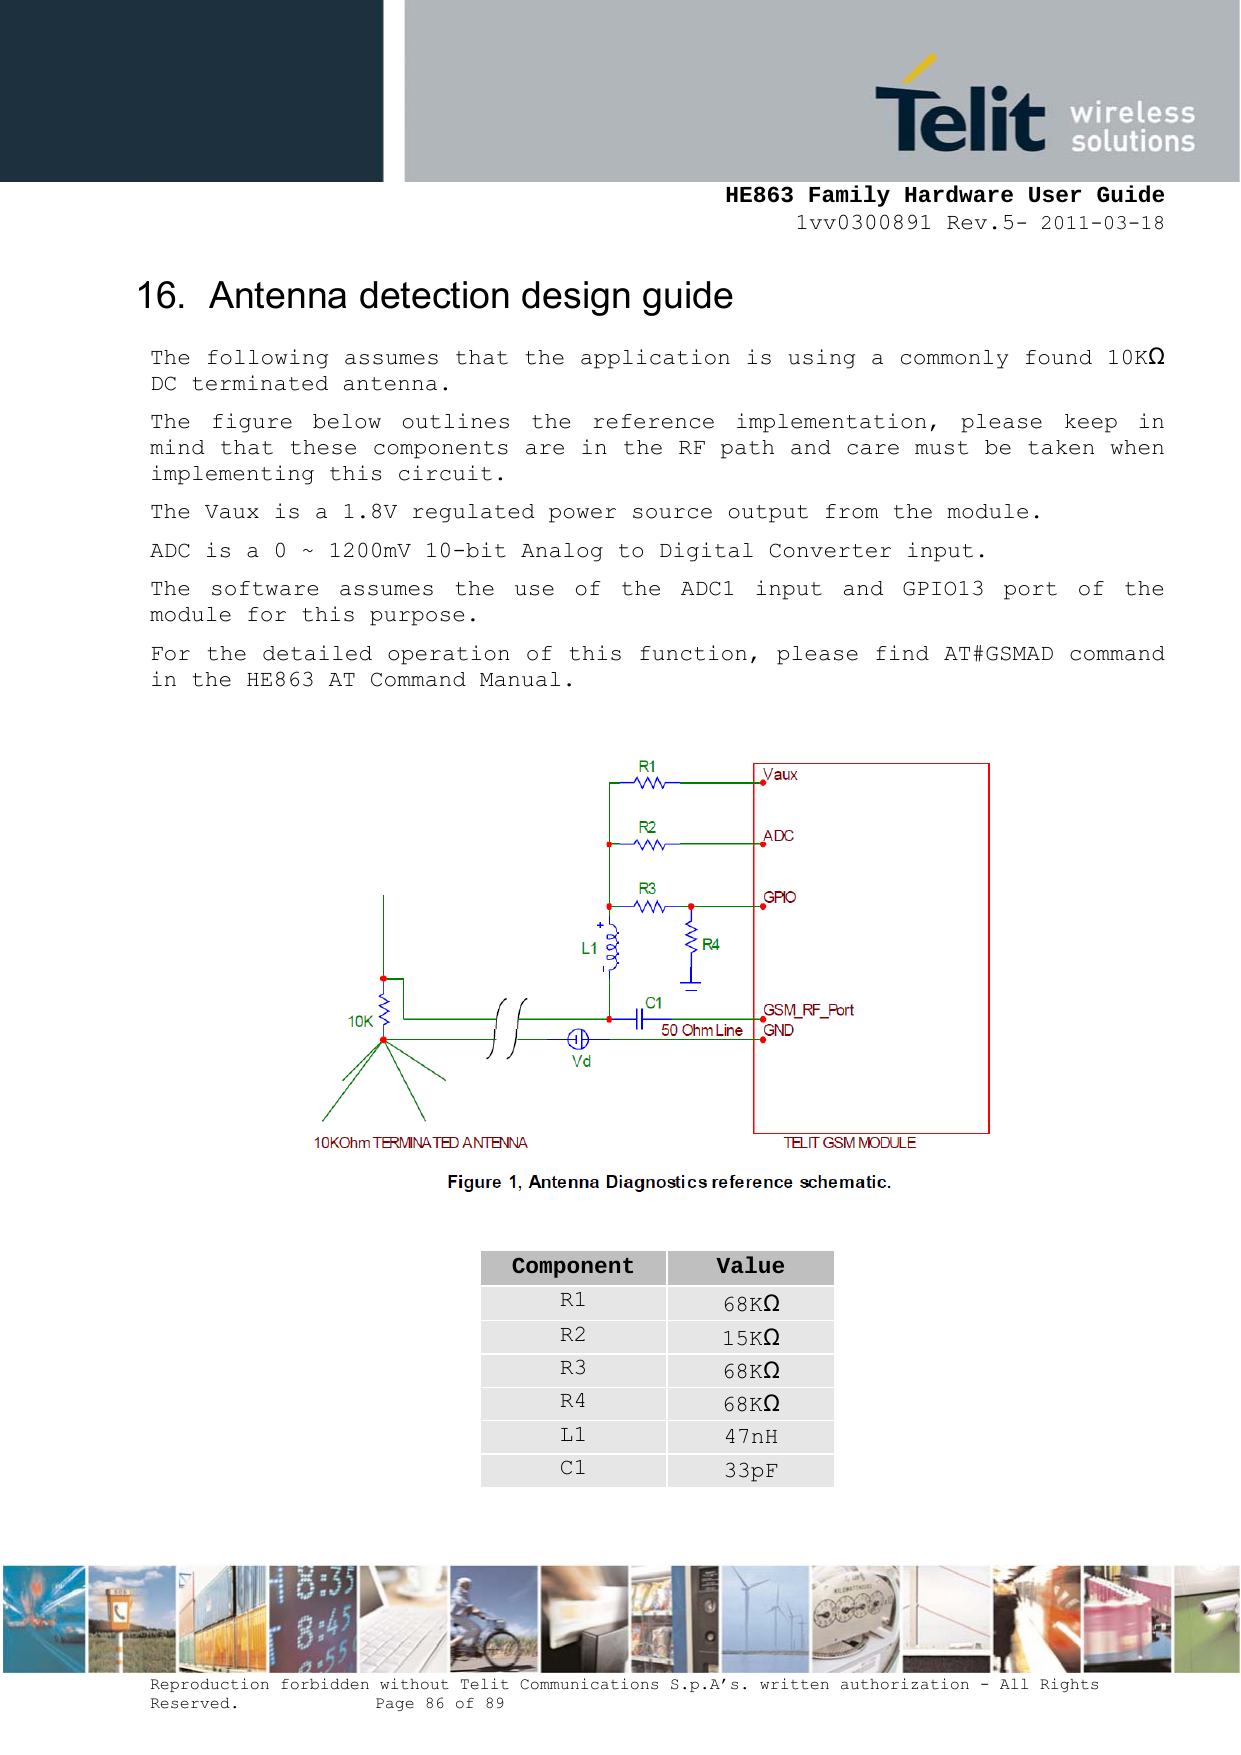     HE863 Family Hardware User Guide 1vv0300891 Rev.5- 2011-03-18    Reproduction forbidden without Telit Communications S.p.A’s. written authorization - All Rights Reserved.    Page 86 of 89  16.  Antenna detection design guide The following assumes that the application is using a commonly found 10KΩ DC terminated antenna. The figure below outlines the reference implementation, please keep in mind that these components are in the RF path and care must be taken when implementing this circuit. The Vaux is a 1.8V regulated power source output from the module. ADC is a 0 ~ 1200mV 10-bit Analog to Digital Converter input. The software assumes the use of the ADC1 input and GPIO13 port of the module for this purpose. For the detailed operation of this function, please find AT#GSMAD command in the HE863 AT Command Manual.    Component  Value R1  68KΩ R2  15KΩ R3  68KΩ R4  68KΩ L1  47nH C1  33pF  